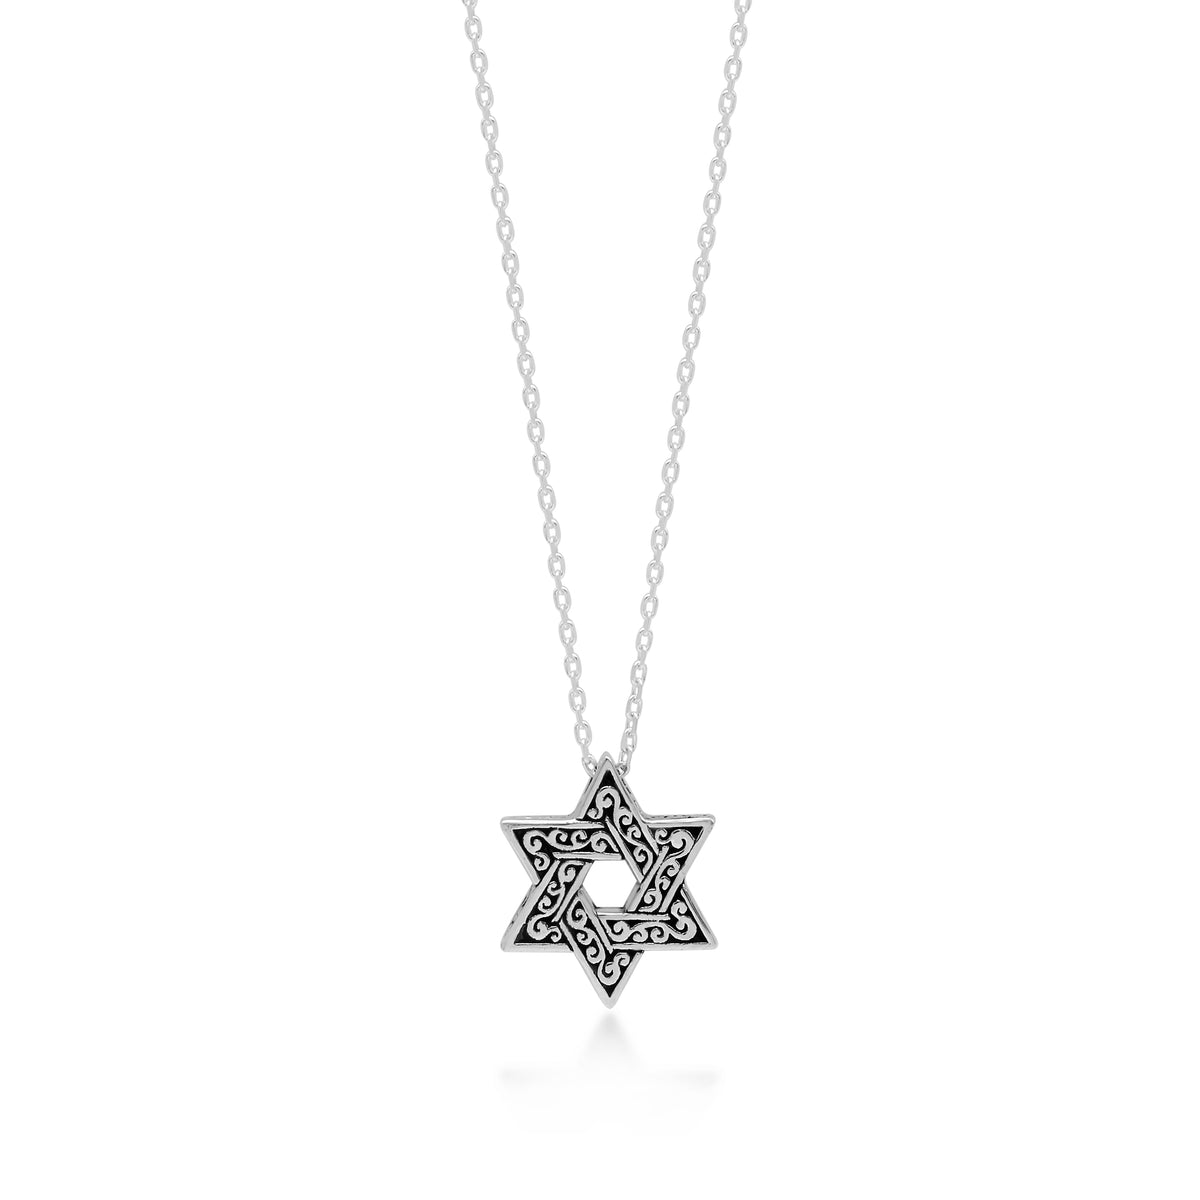 LH Signature Scroll Sterling Silver Delicate Star-of-David Pendant Necklace in 18" Adjustable Chain.  Pendant size 15mm - Lois Hill Jewelry